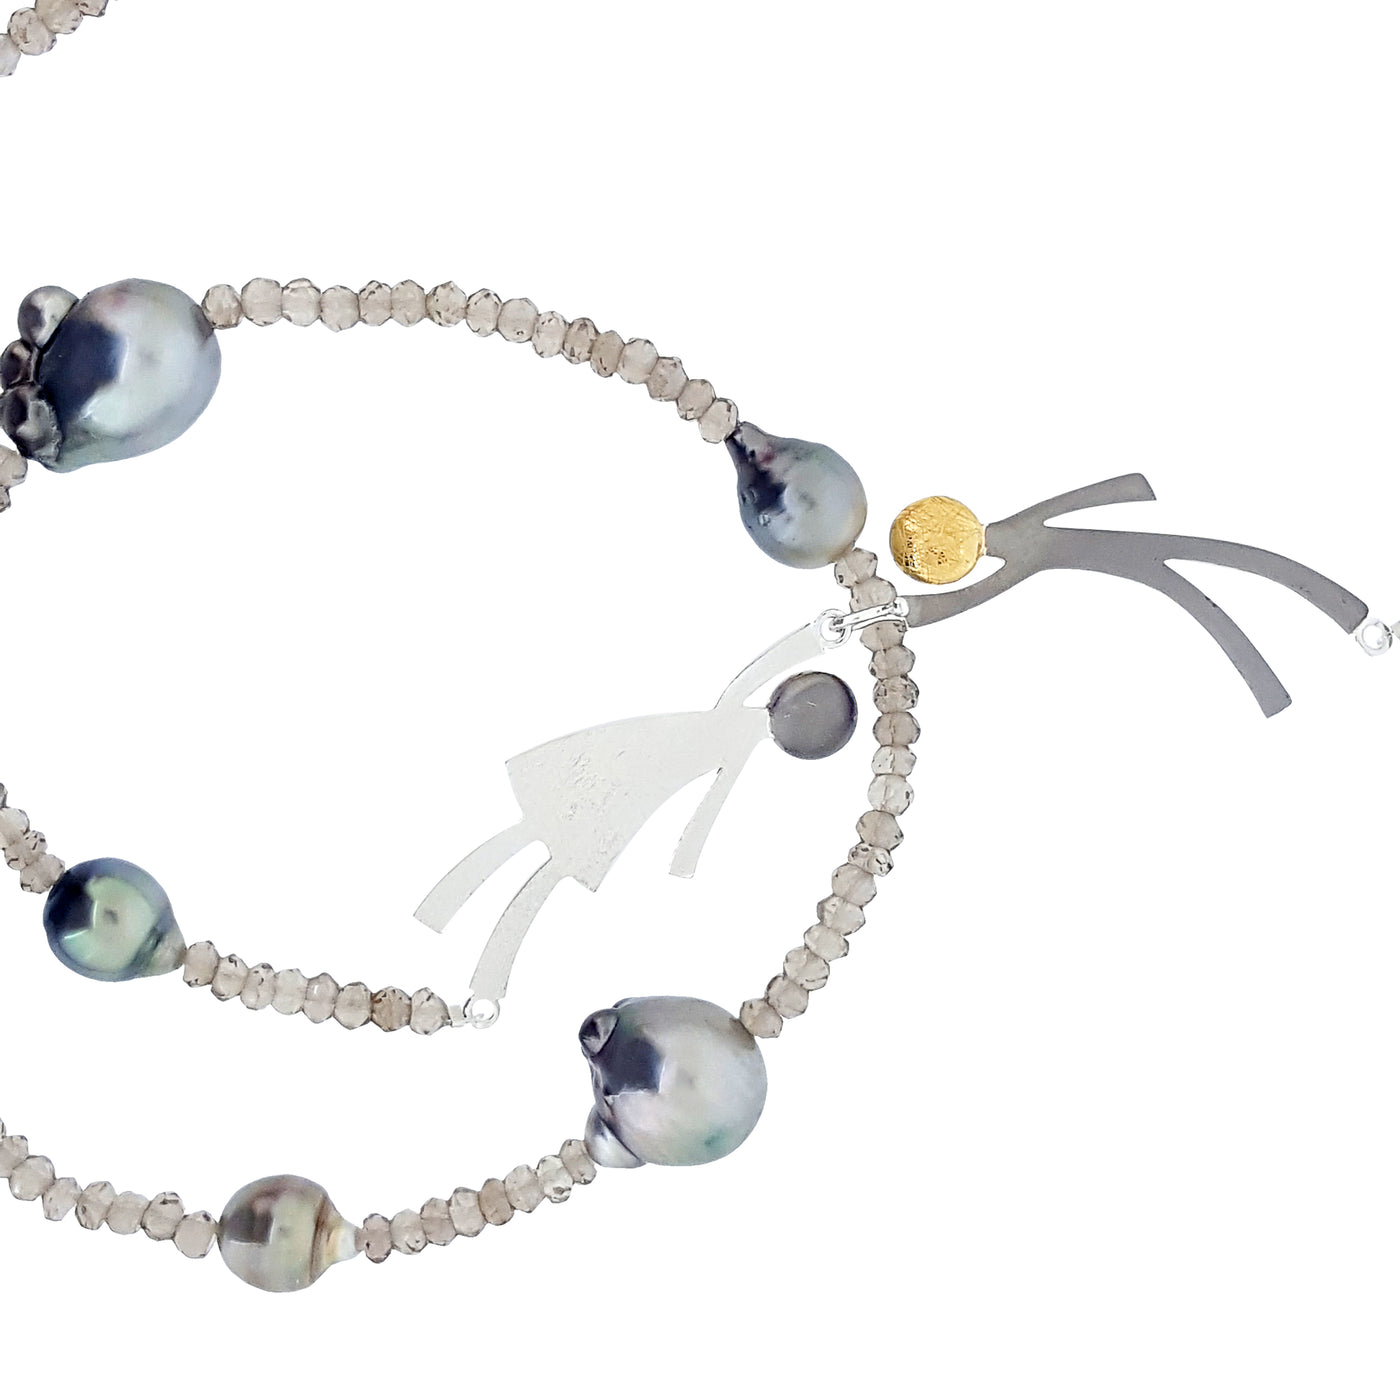 Ruby & Oliver Necklace 'Smoky Quartz' - The Courthouse Collection